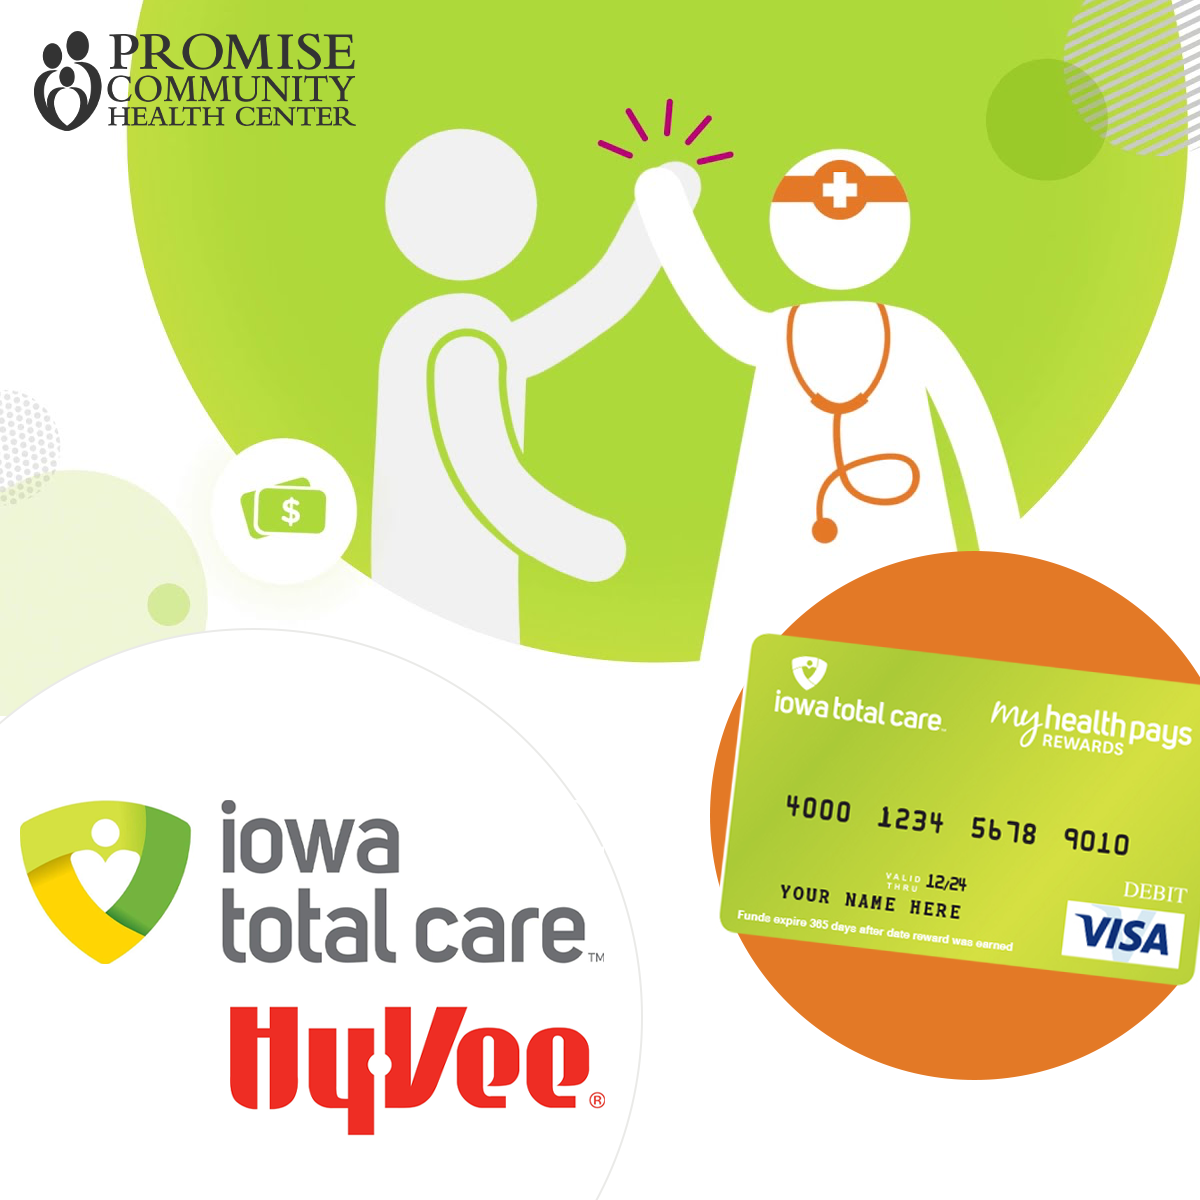 Iowa Total Care, My Health Pays Rewards | Promise Community Health Center in Sioux Center, Iowa | Promise offers medical care, prenatal care, behavioral healthcare, population health care as well as dental and vision care,  nurse health coaching, clinical pharmacy and affordable medications, lab services and immunizations, interpretation and translation, and various other services.